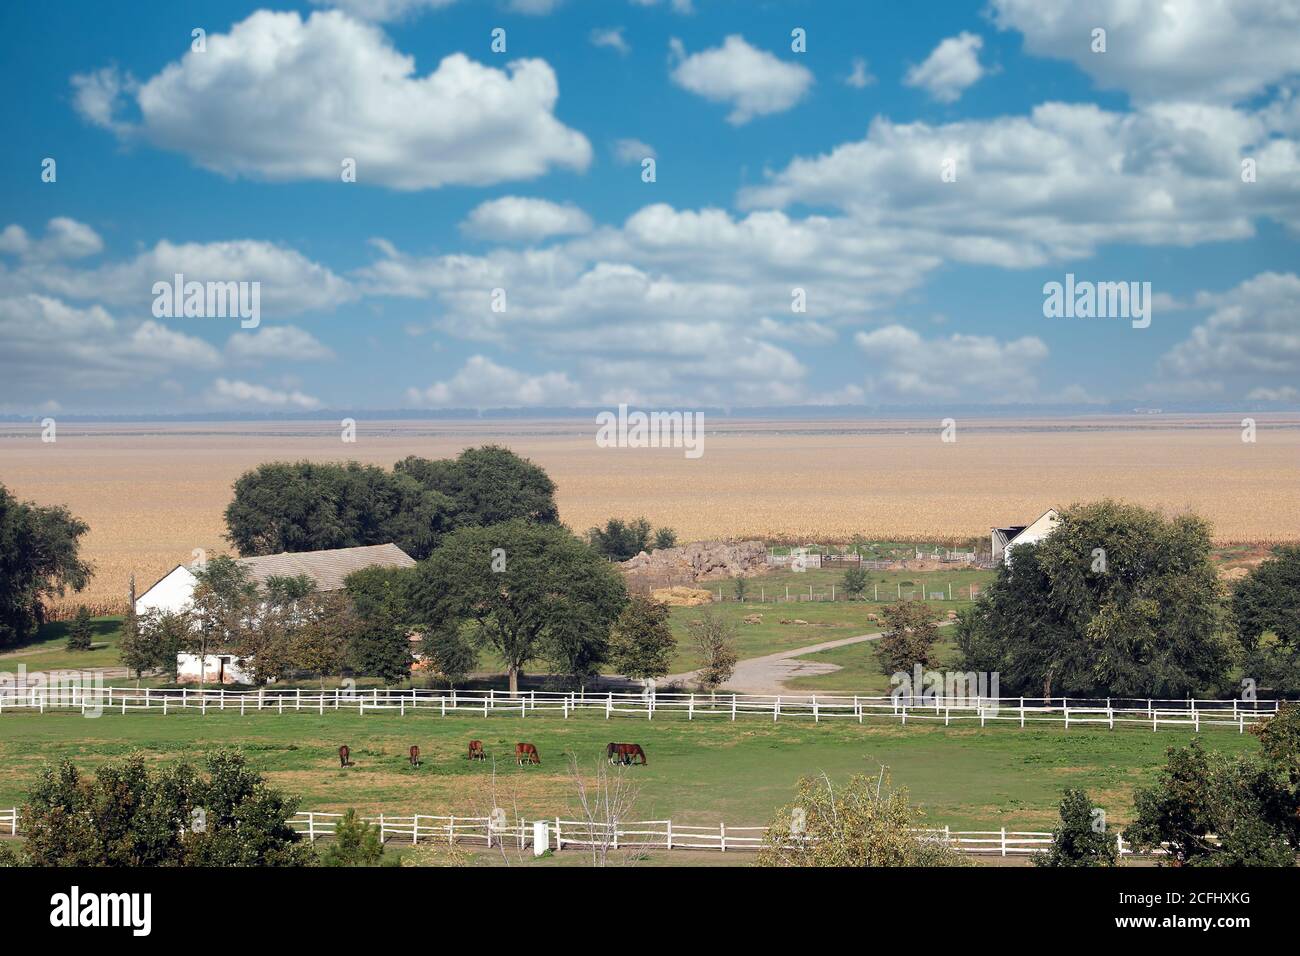 farm with horses in coral landscape Stock Photo